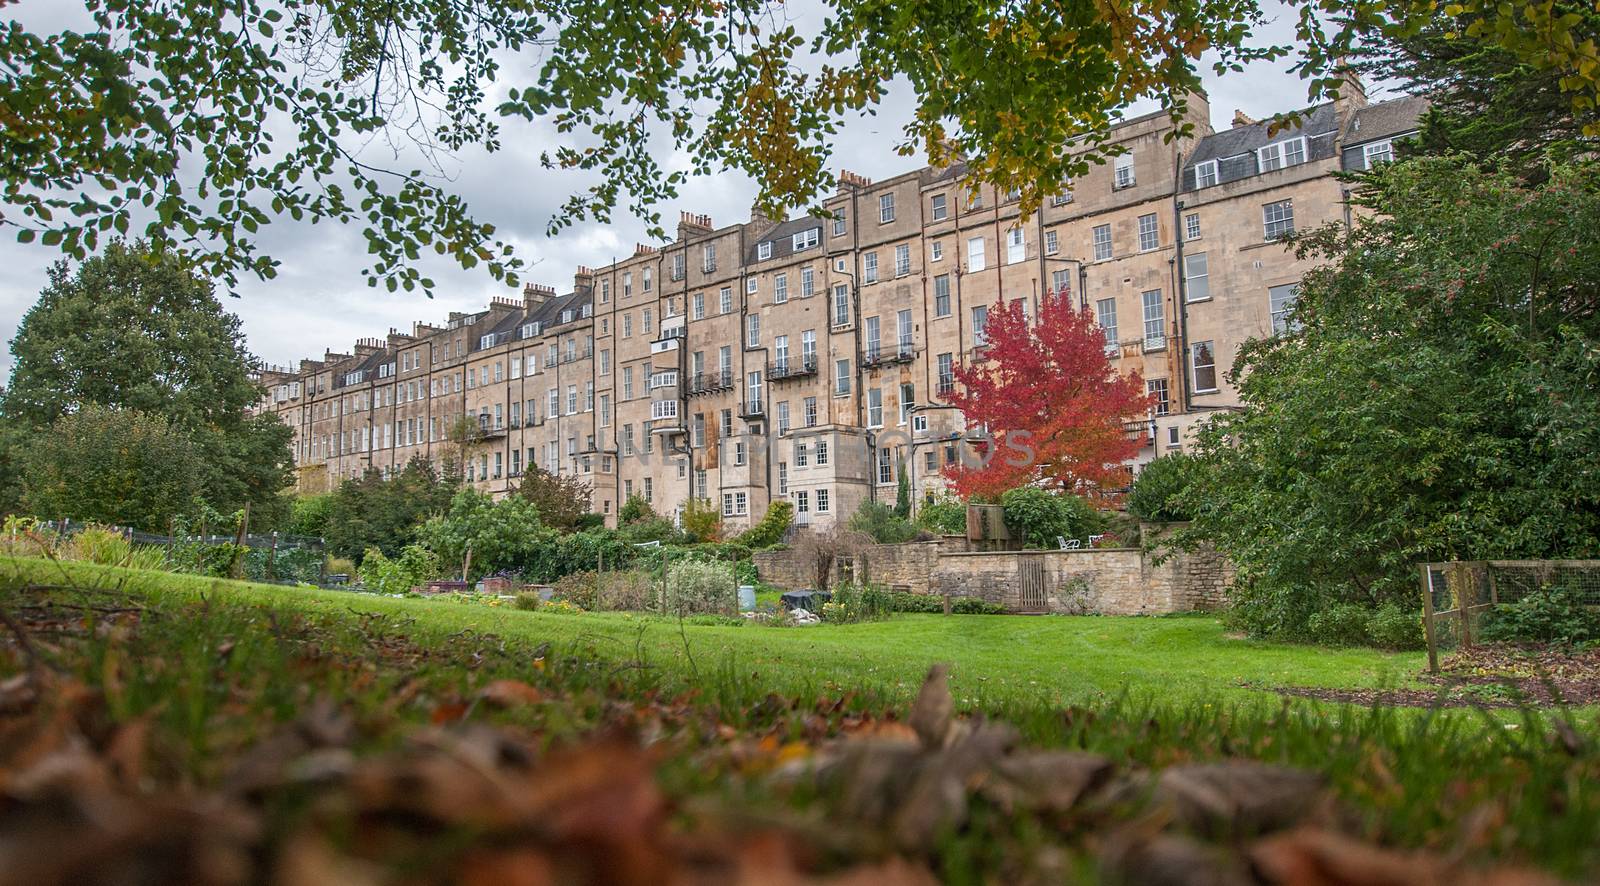 bath buildings in the autumn by sirspread